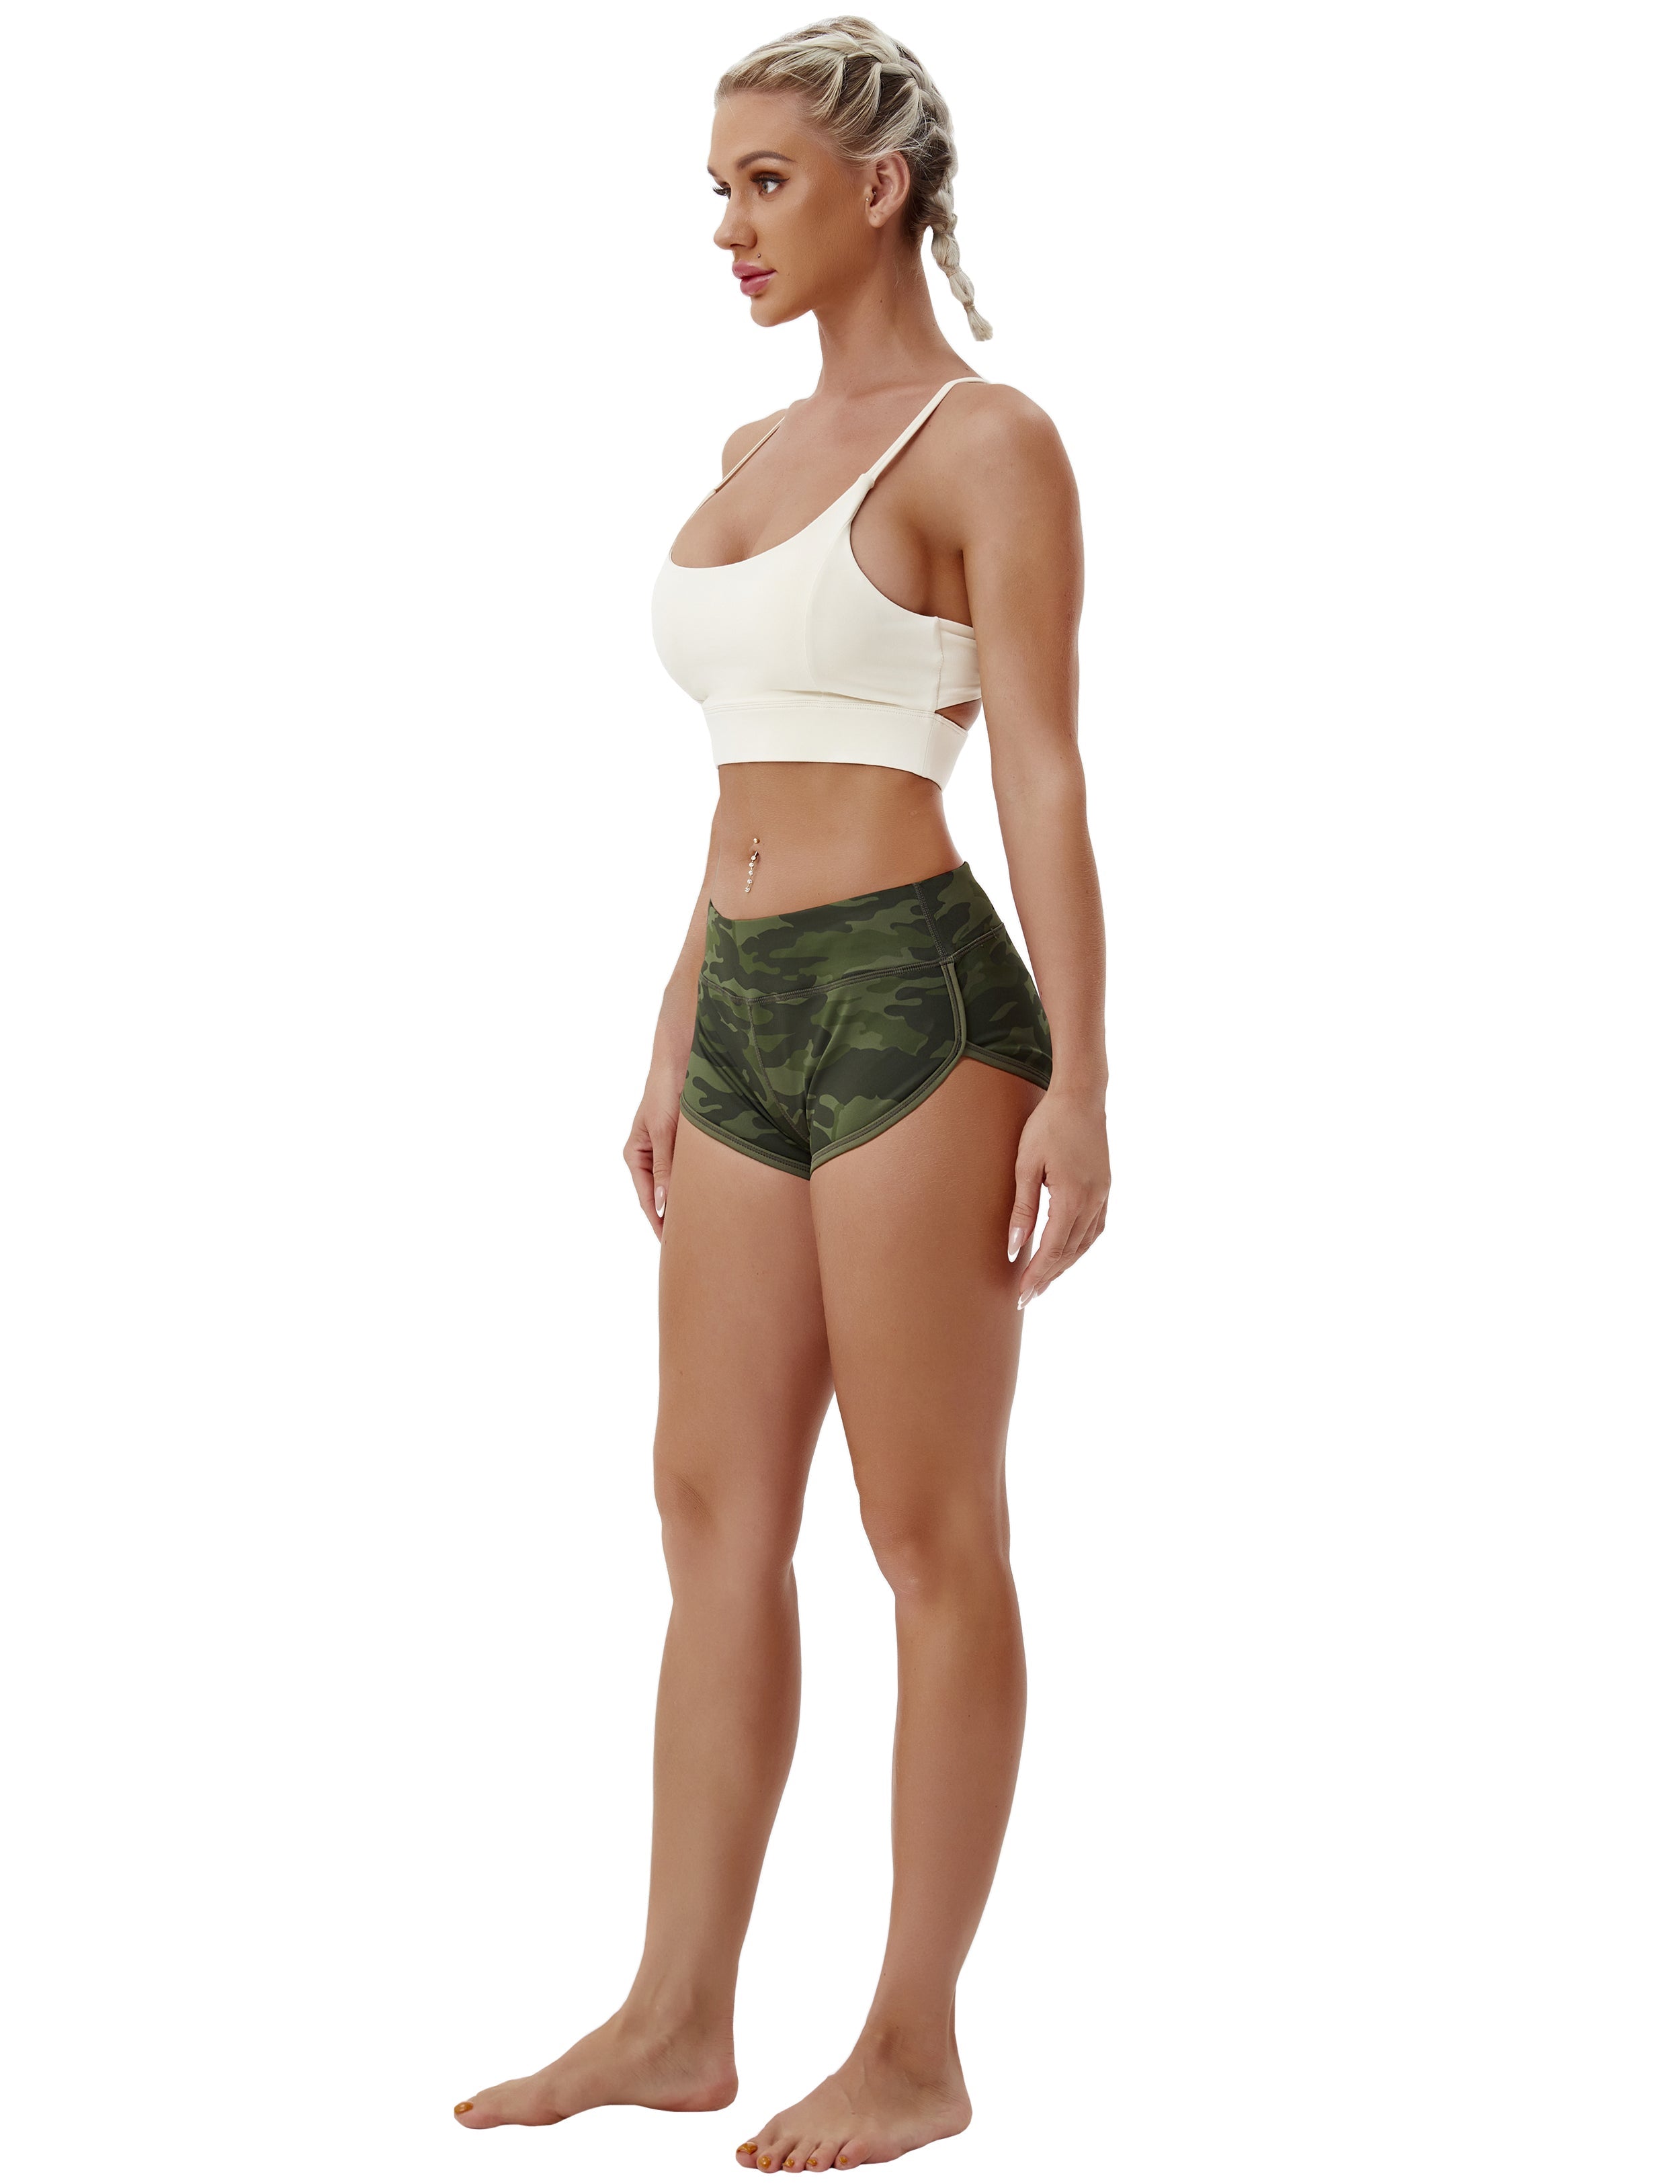 Printed Booty Pilates Shorts green camo Sleek, soft, smooth and totally comfortable: our newest sexy style is here. Softest-ever fabric High elasticity High density 4-way stretch Fabric doesn't attract lint easily No see-through Moisture-wicking Machine wash 78% Polyester, 22% Spandex